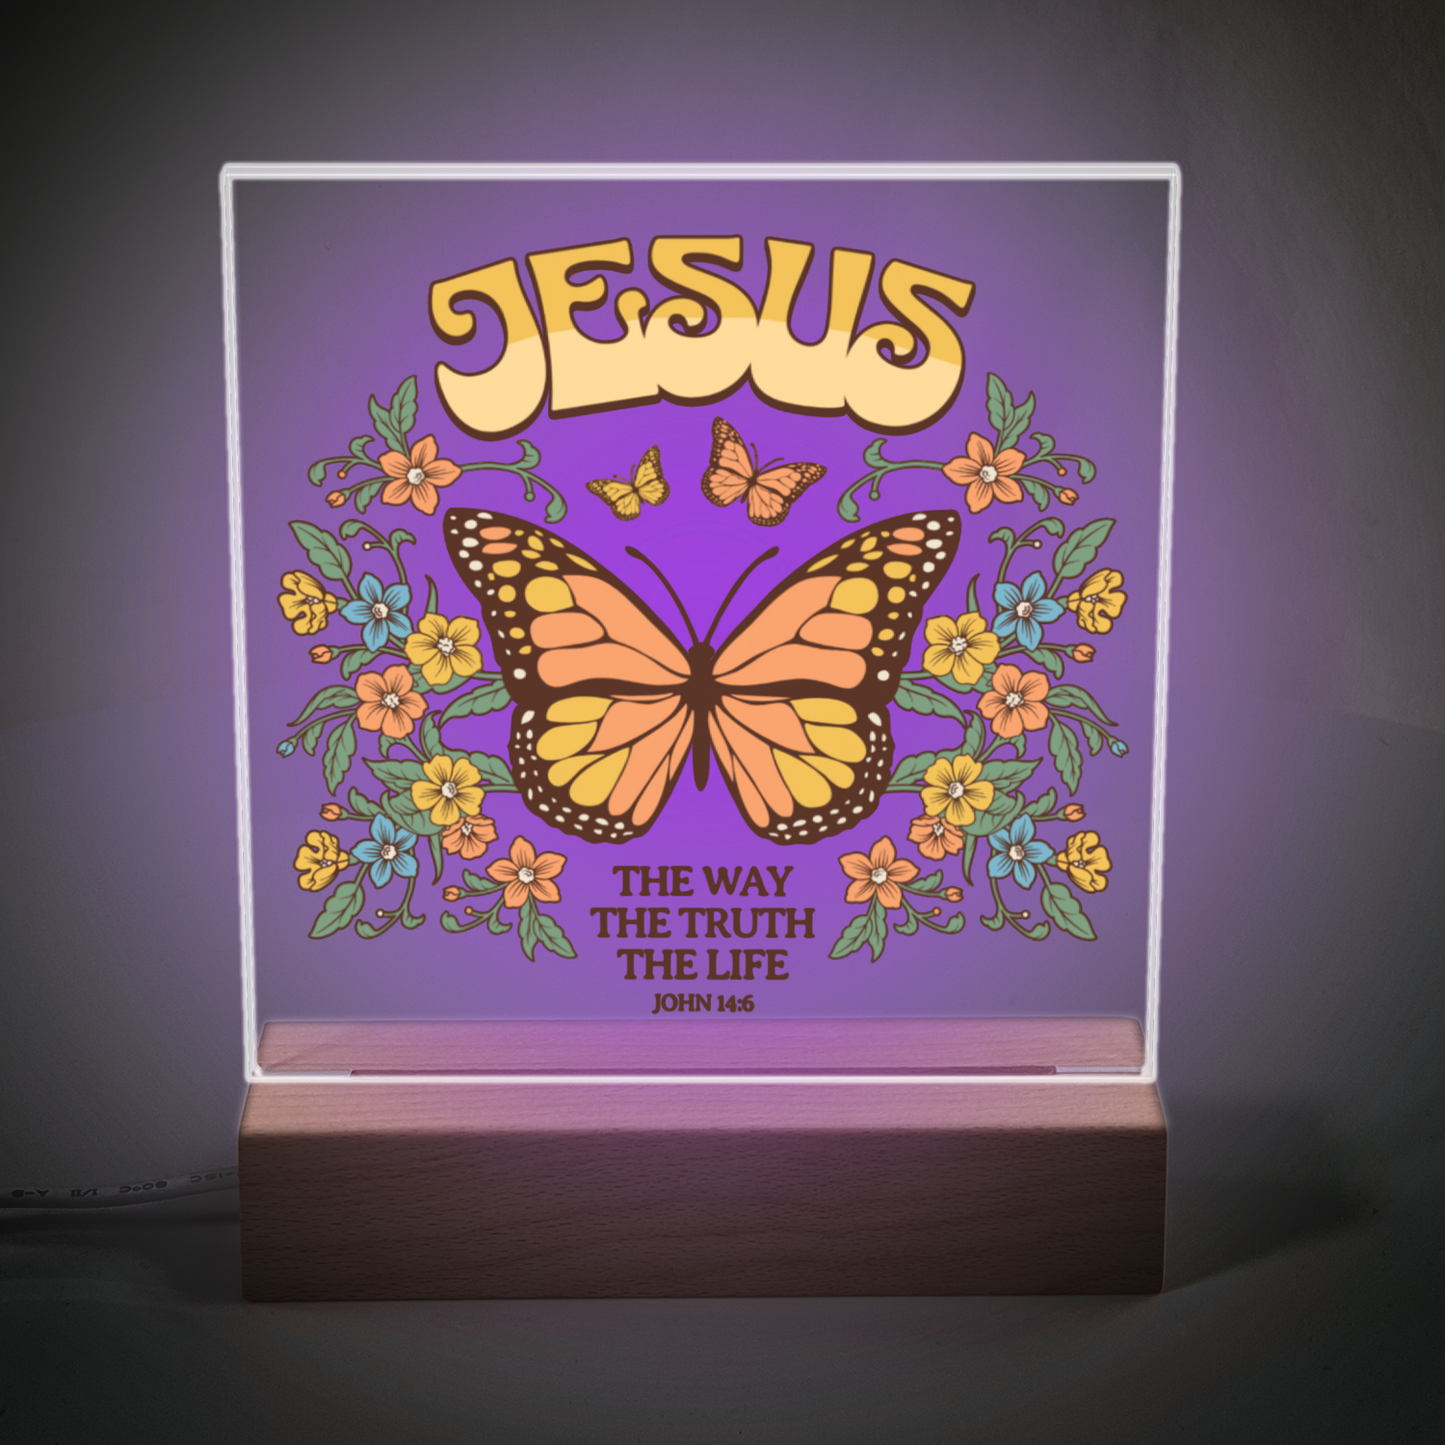 Christian Acrylic Square Plaque | The Way The Truth The Life | John 14:6